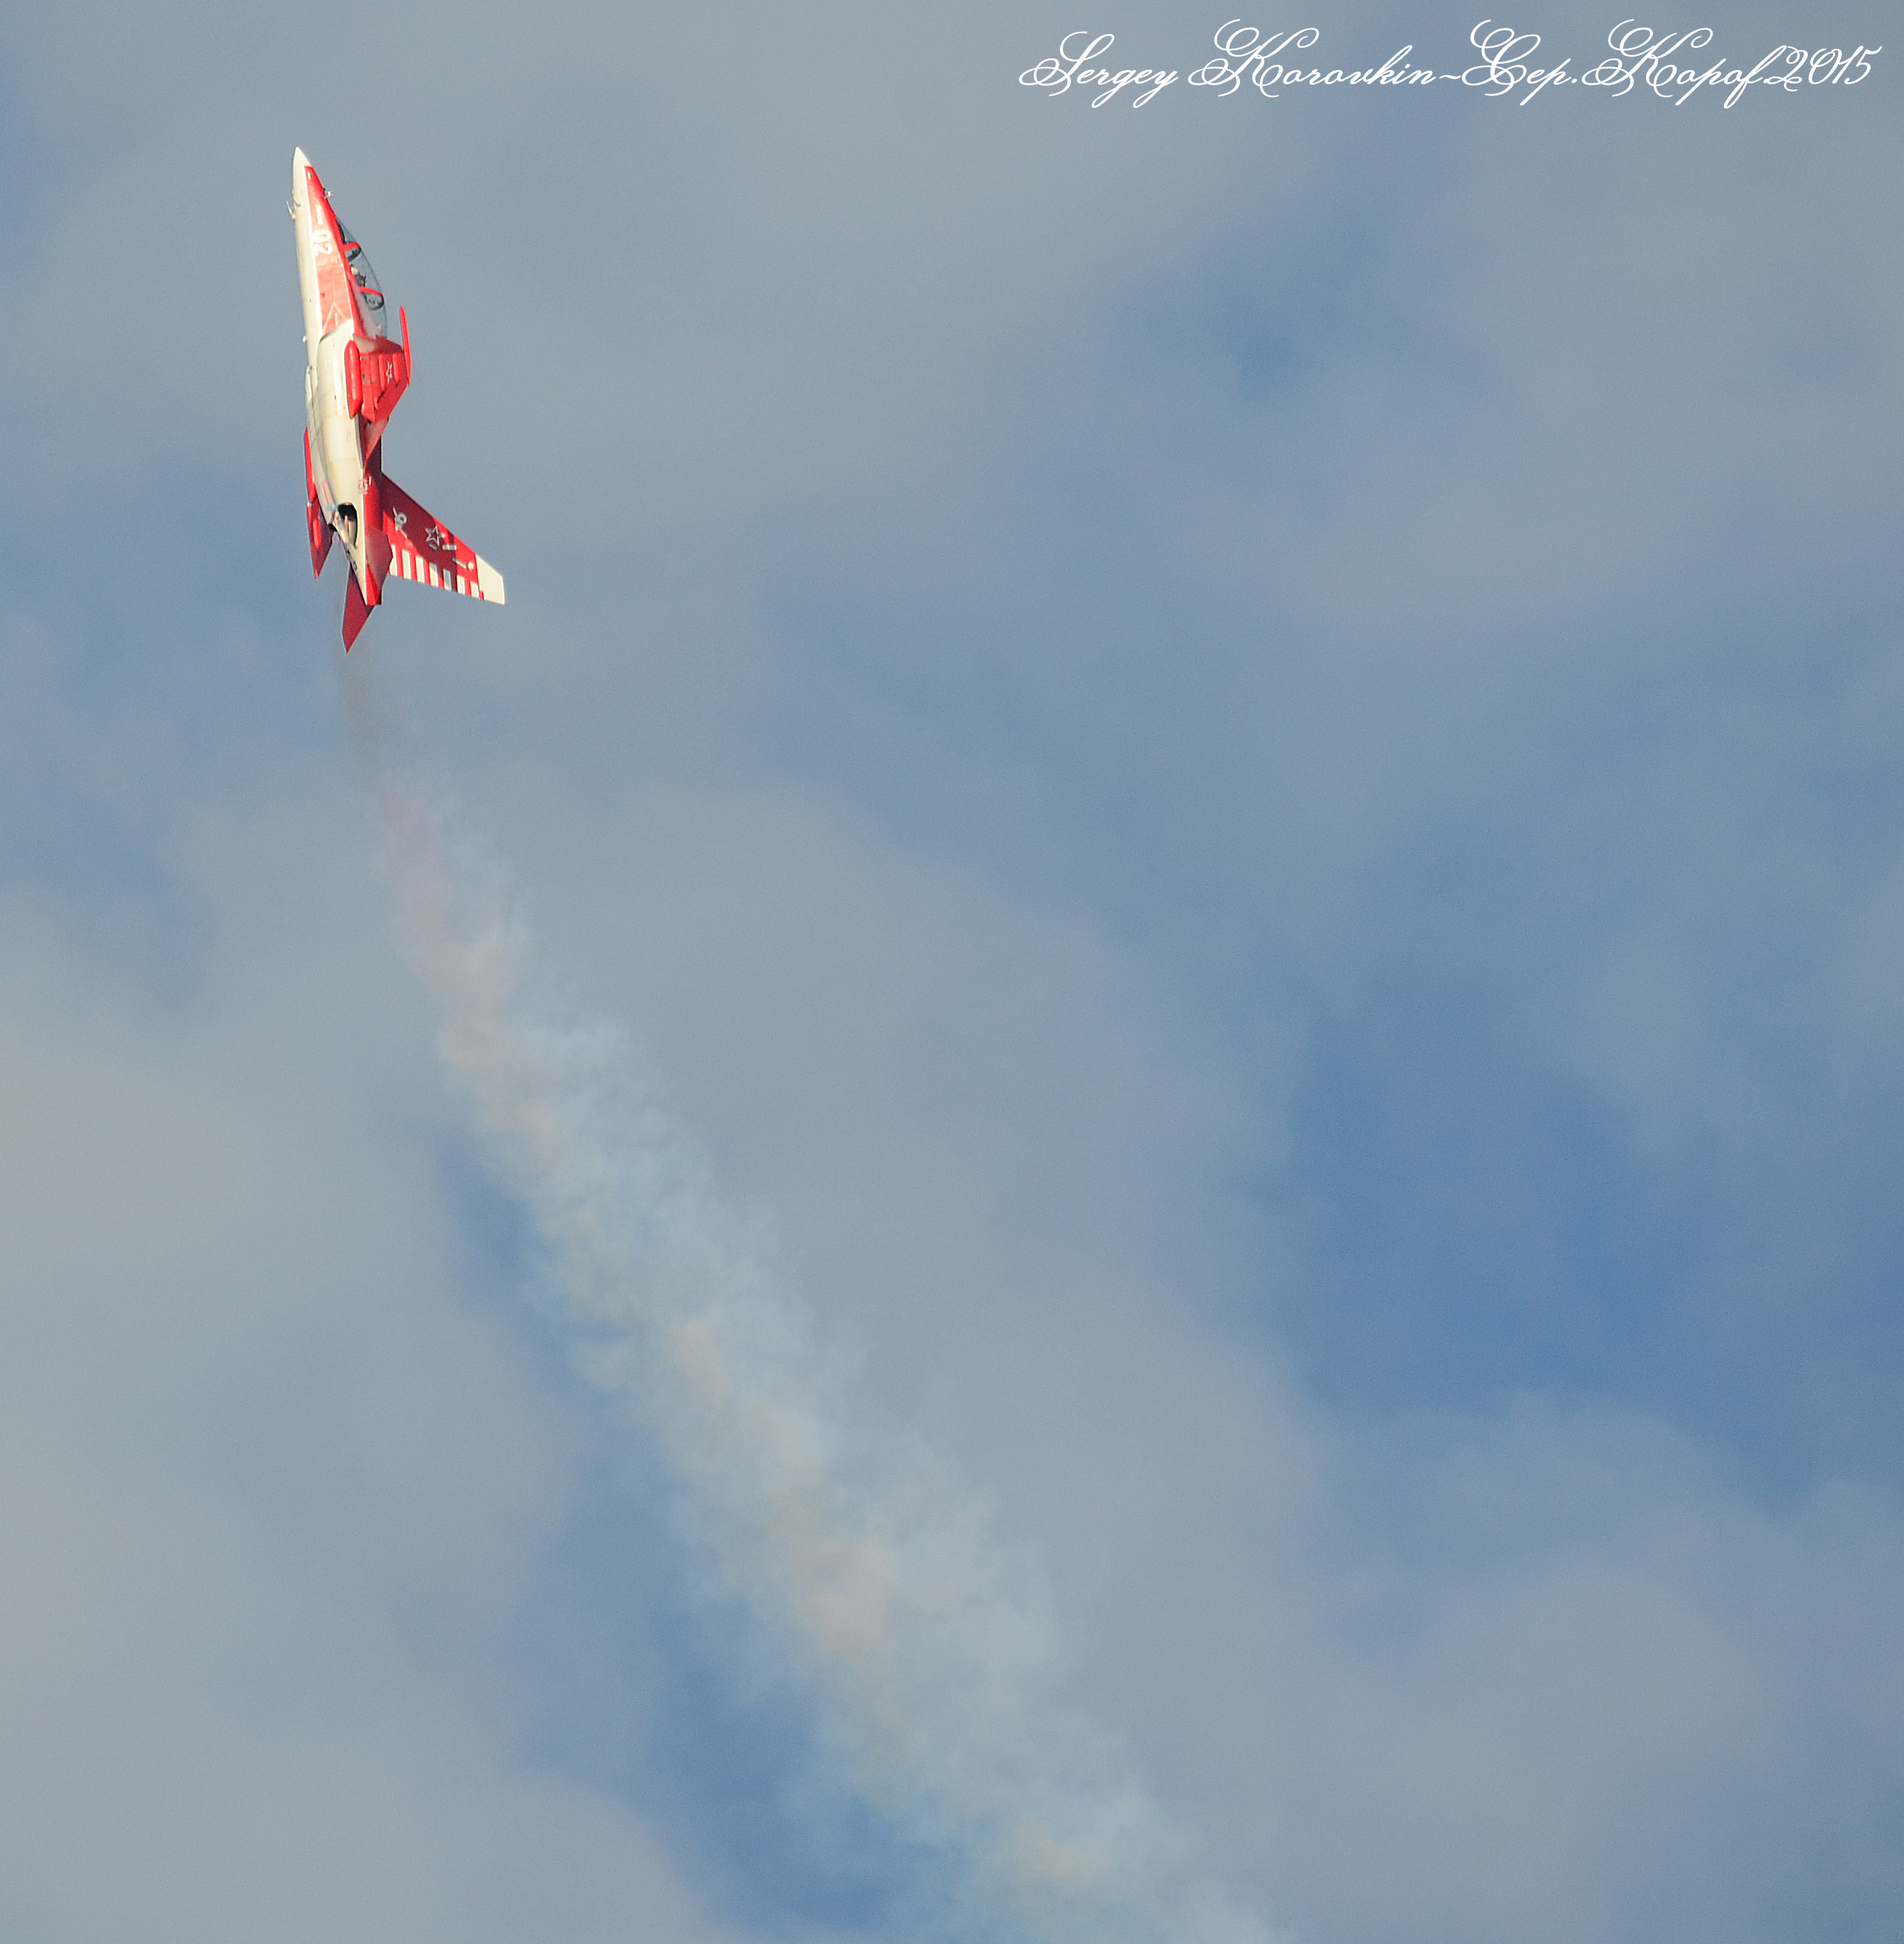 MAKS-2015 Air Show: Photos and Discussion - Page 3 0_17b905_40e0b6f_orig